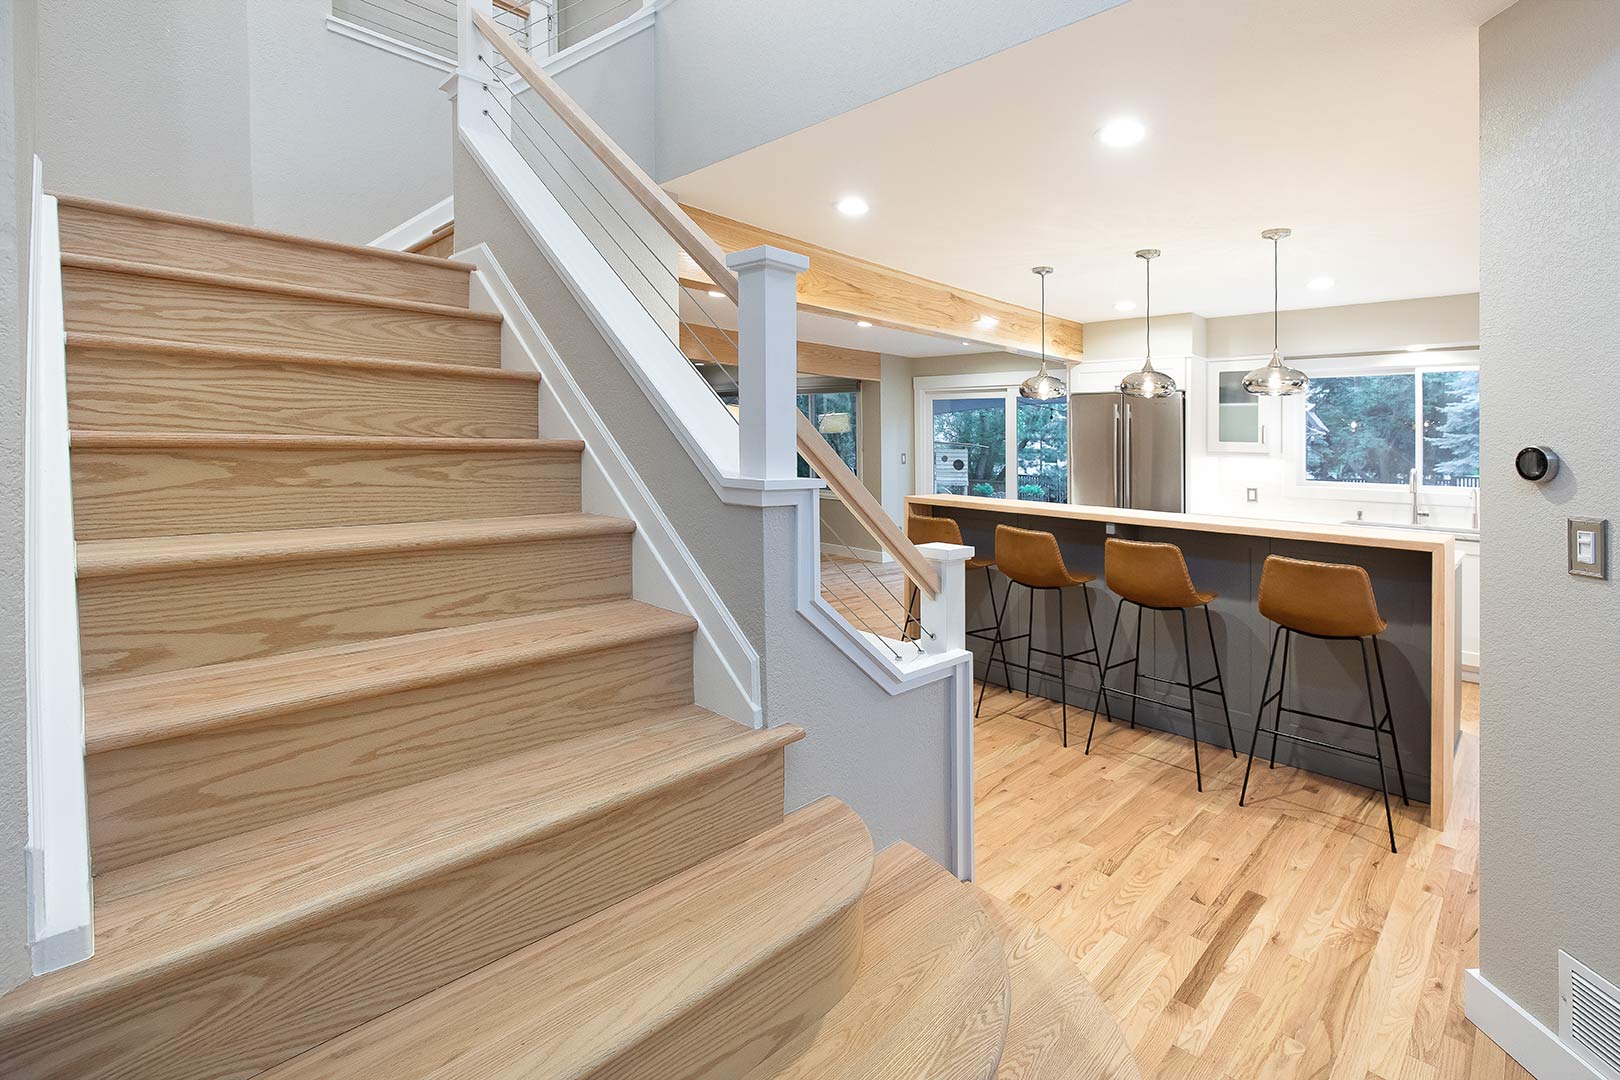 Detailed image showing the juxtaposition of the stunning white oak staircase with the white oak waterfall counter and barstools of the kitchen in the background. 